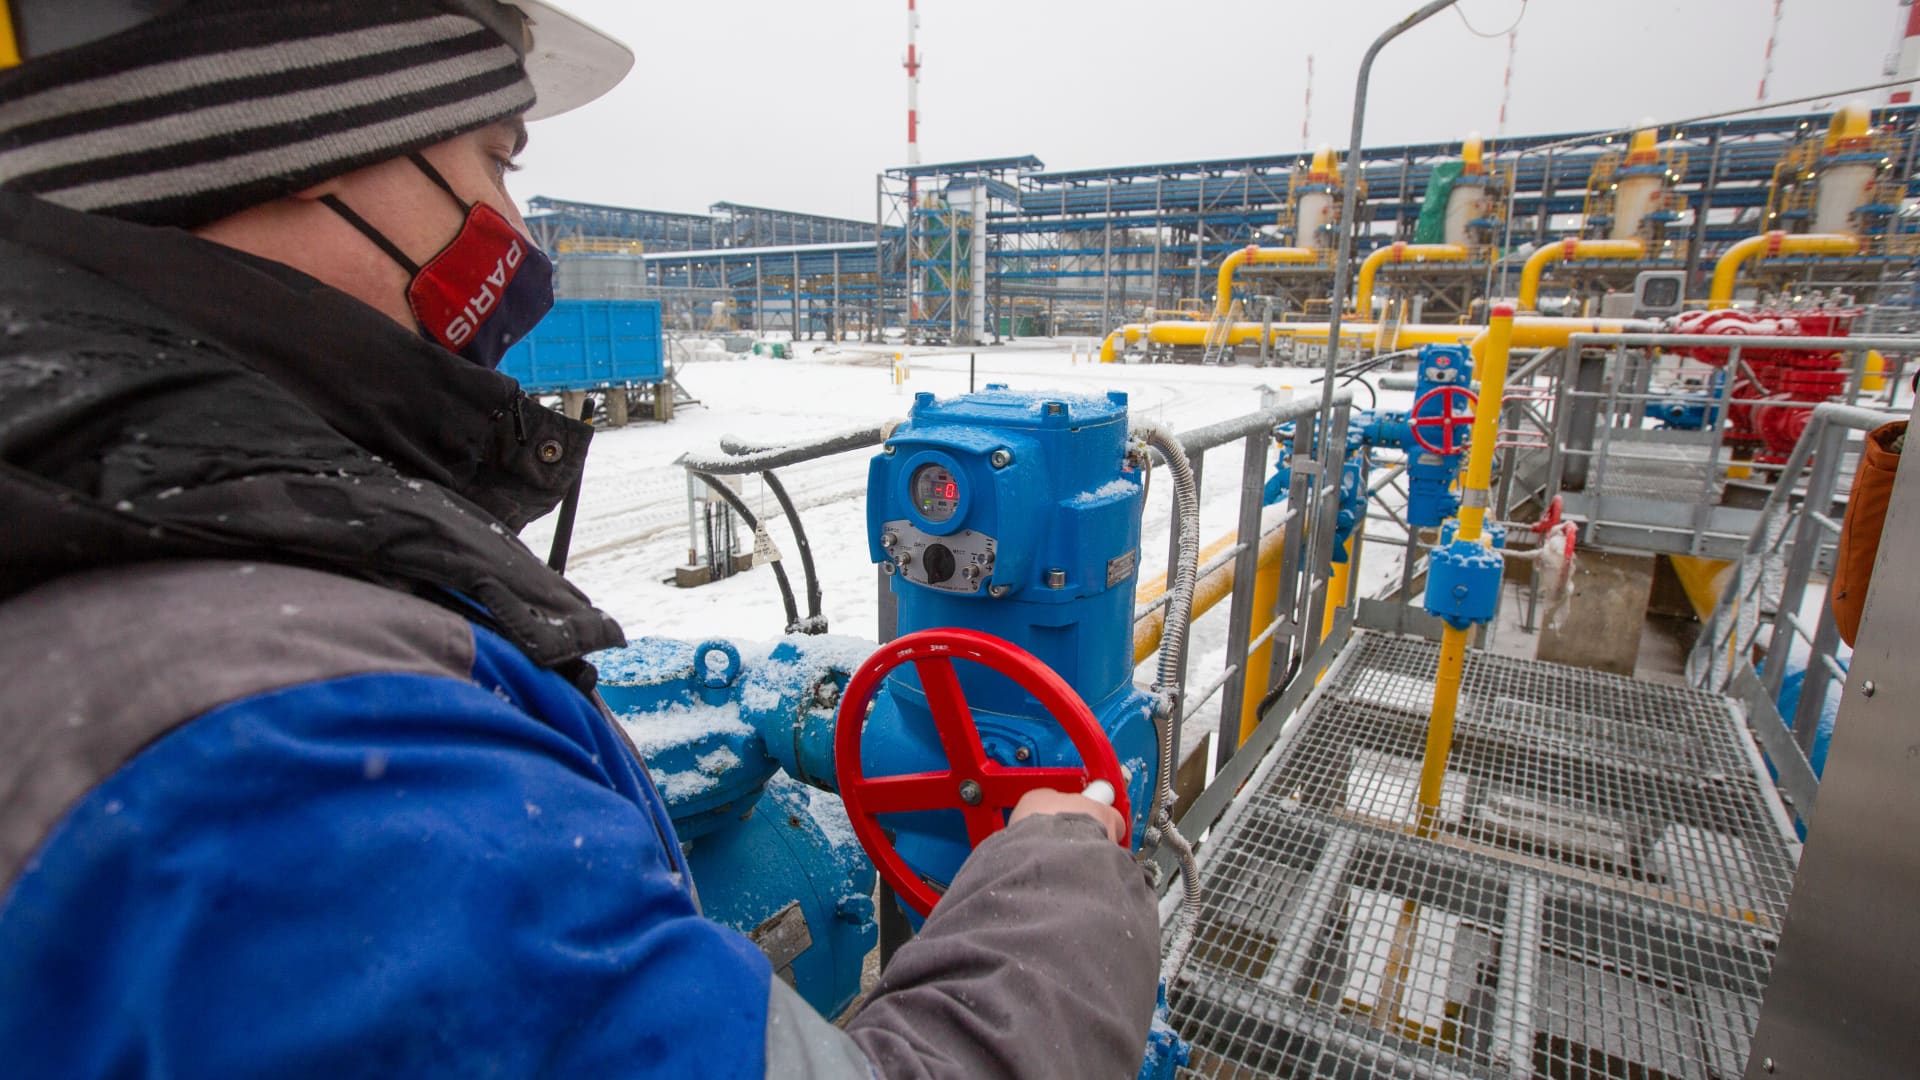 A worker adjusts a pipeline valve at the Gazprom PJSC Slavyanskaya compressor station, the starting point of the Nord Stream 2 gas pipeline, in Ust-Luga, Russia, on Thursday, Jan. 28, 2021.